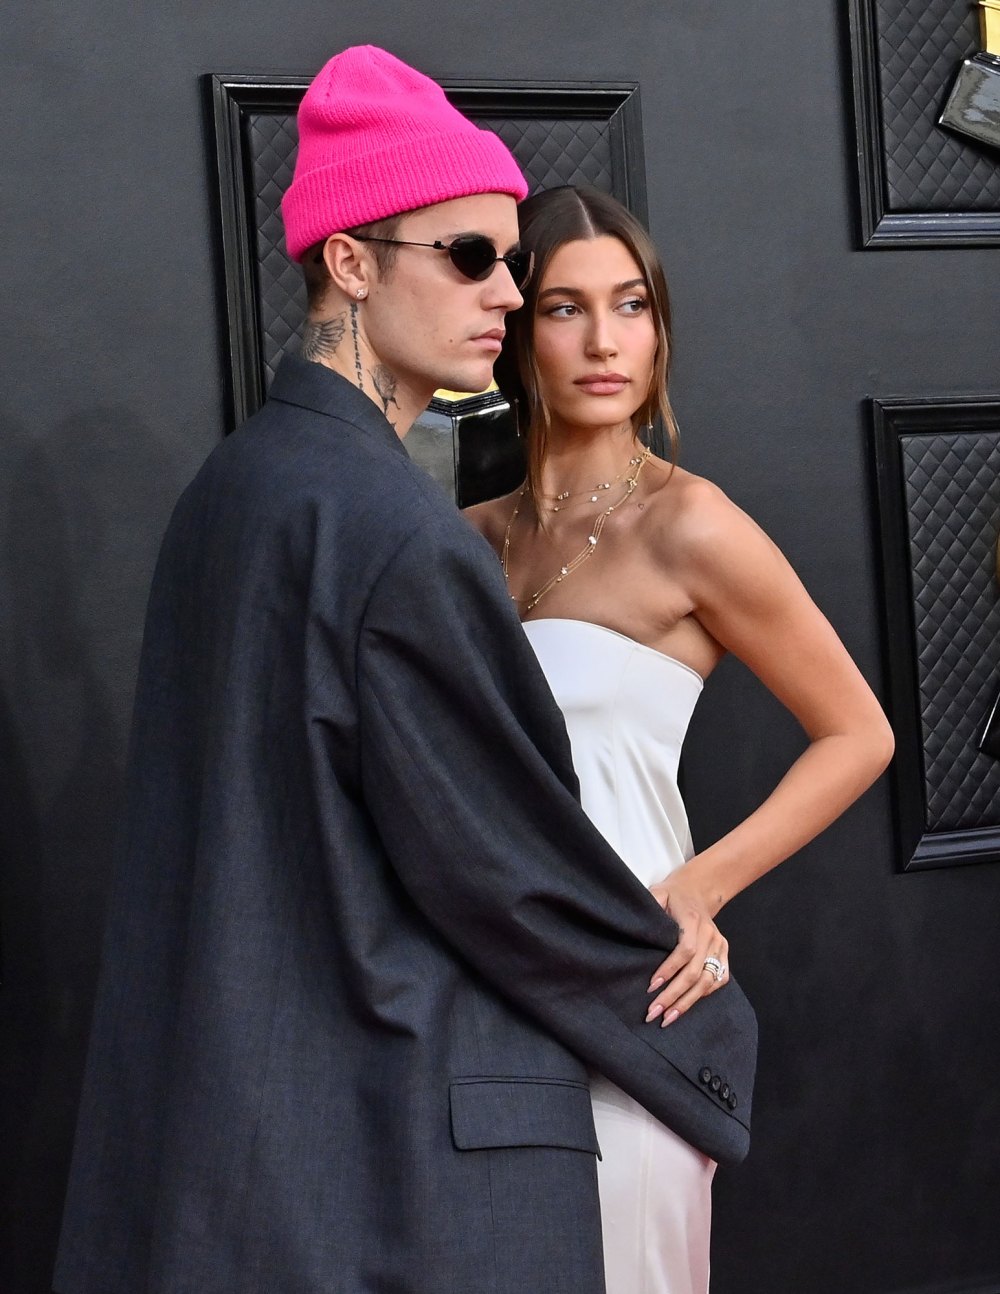 Justin Bieber Seemingly Cancels Remaining Justice World Tour Dates Amid Hailey Bieber's Drama With Selena Gomez pink hat